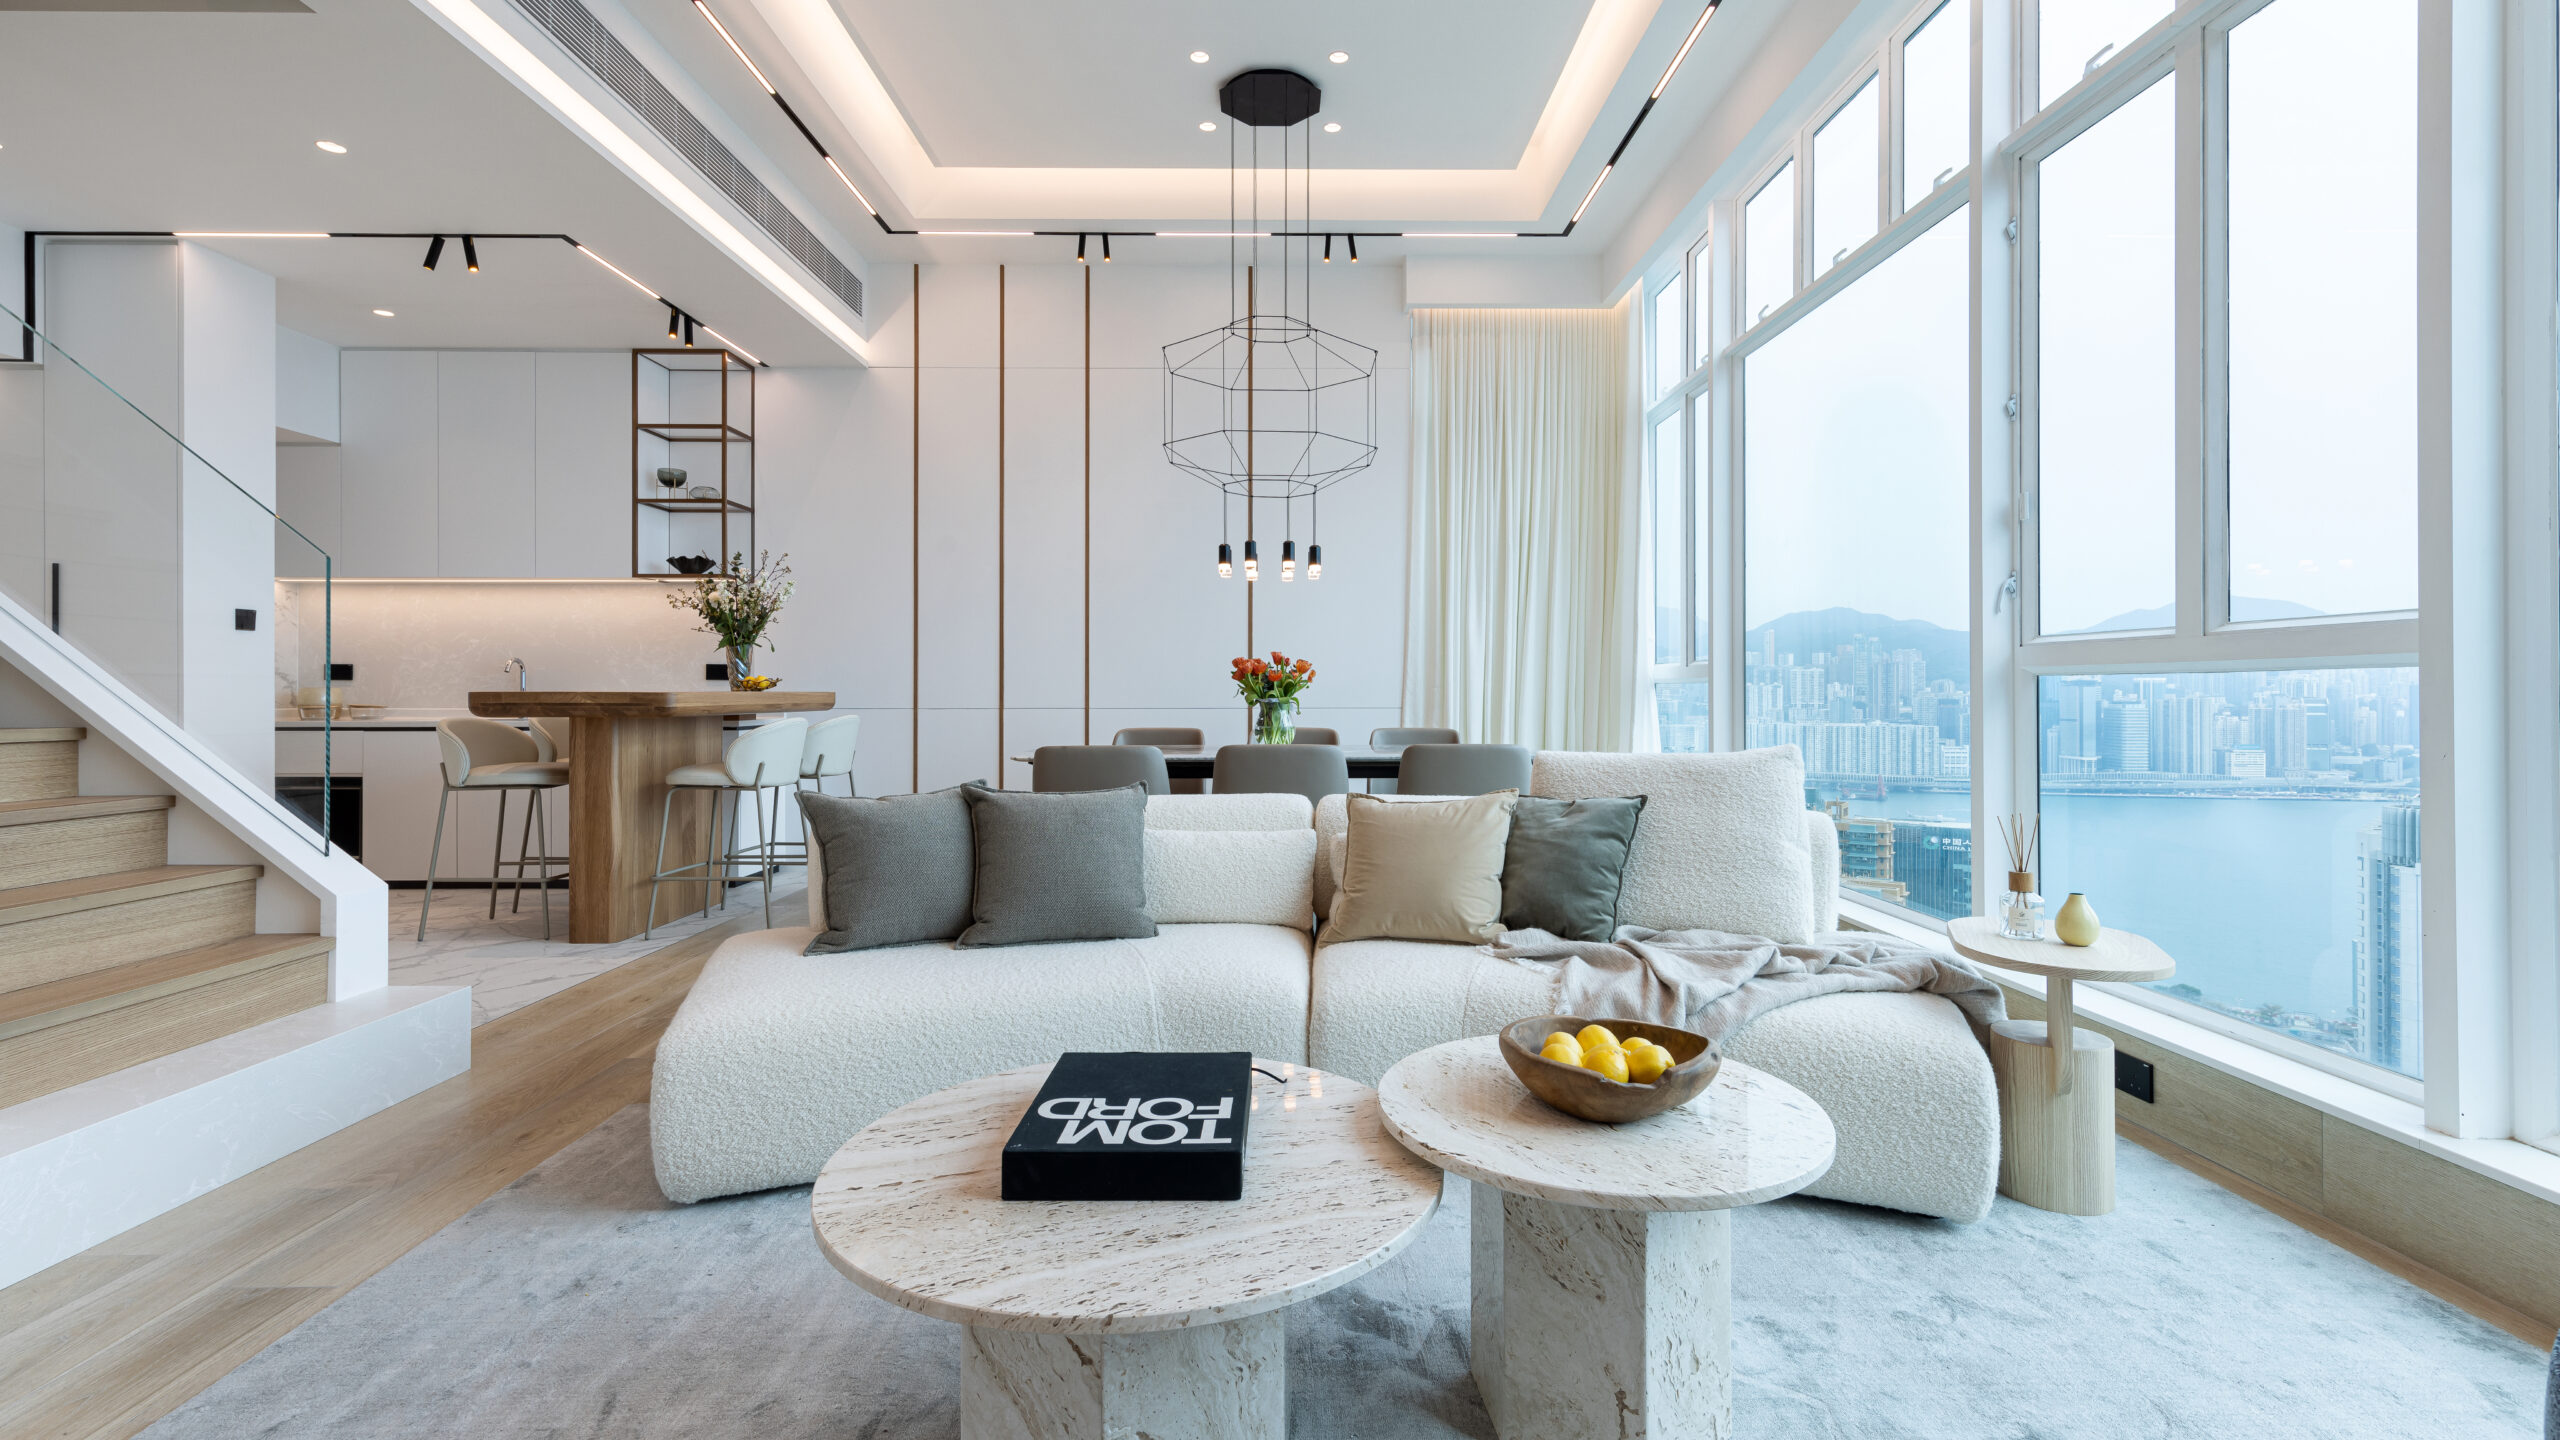 Seamless Serenity: Open concept, dual layers, expansive views – this redesigned Kowloon peninsula penthouse is top draw